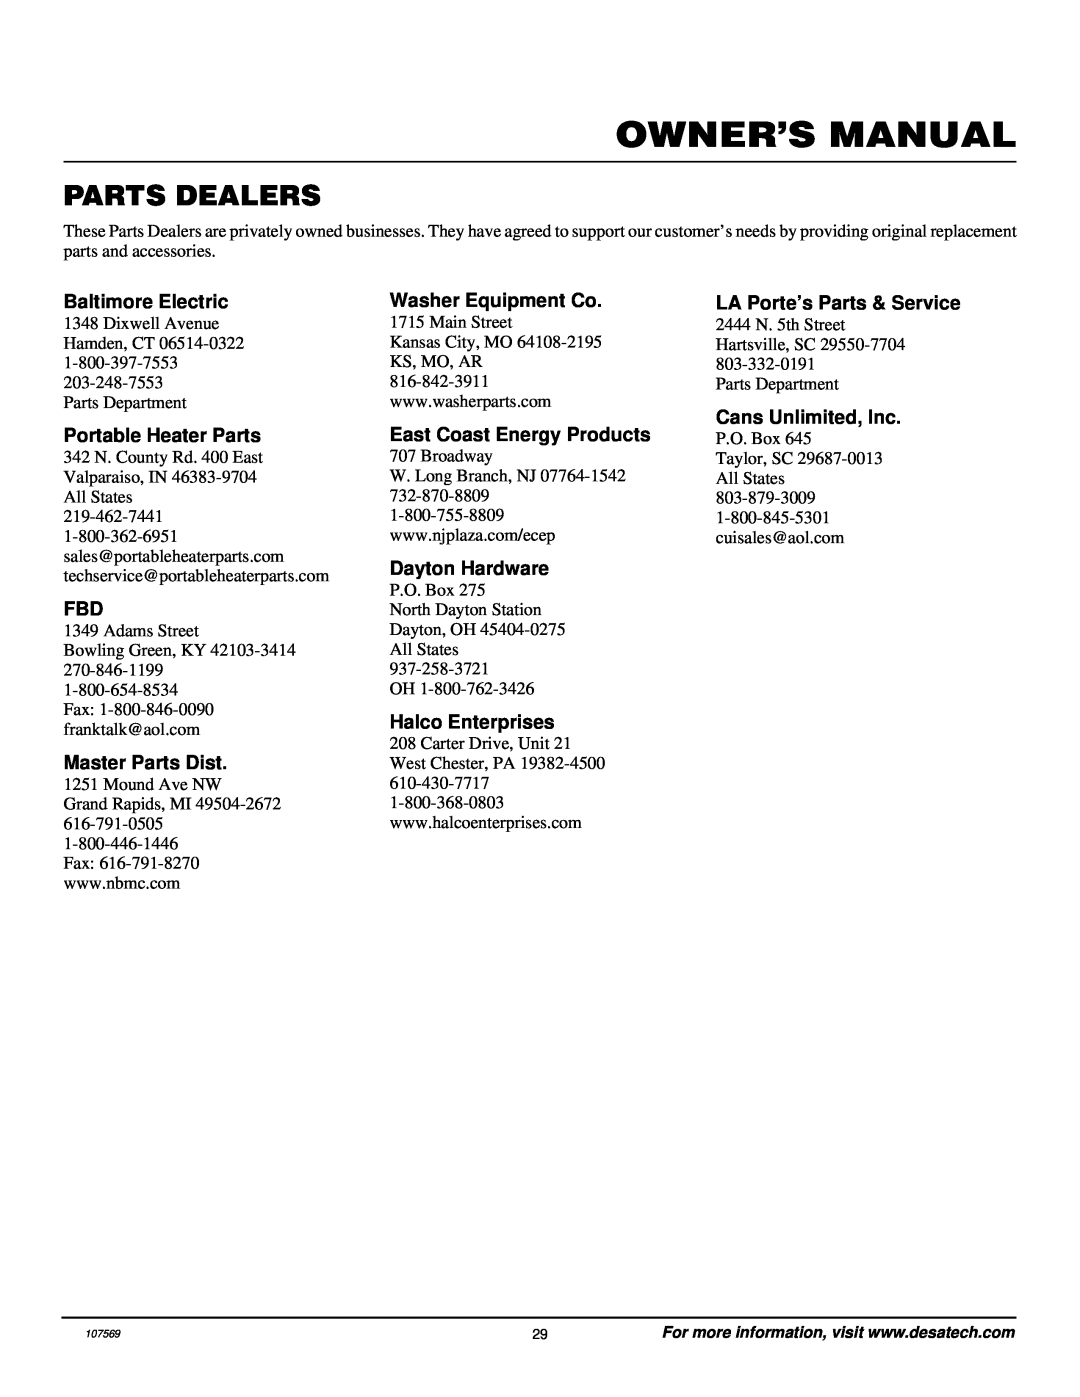 Desa CGEFP33NR Parts Dealers, Baltimore Electric, Washer Equipment Co, Cans Unlimited, Inc, Portable Heater Parts 